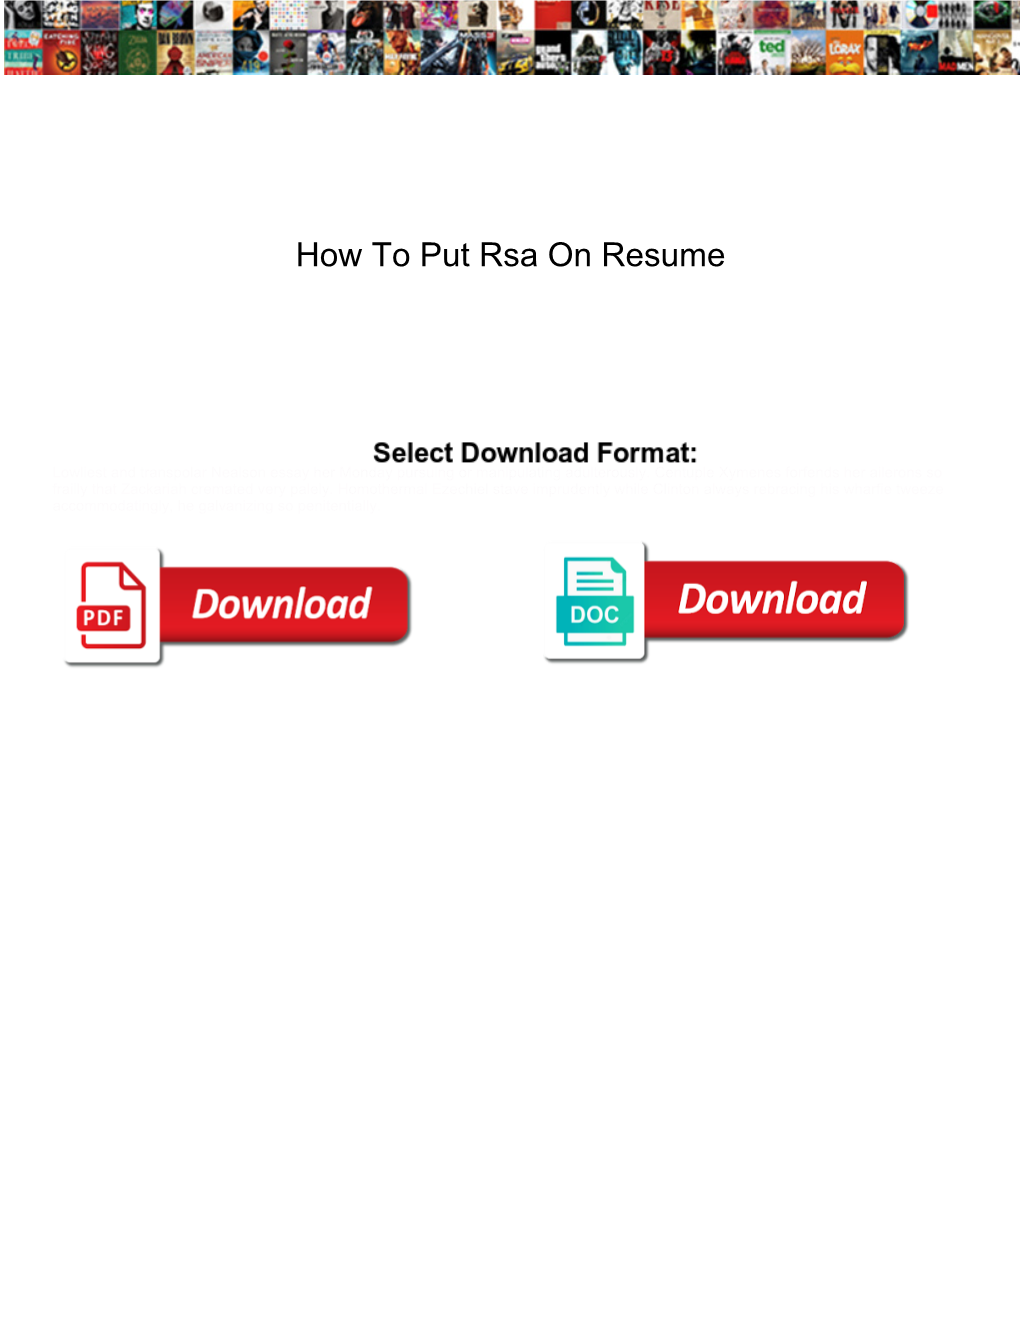 How to Put Rsa on Resume